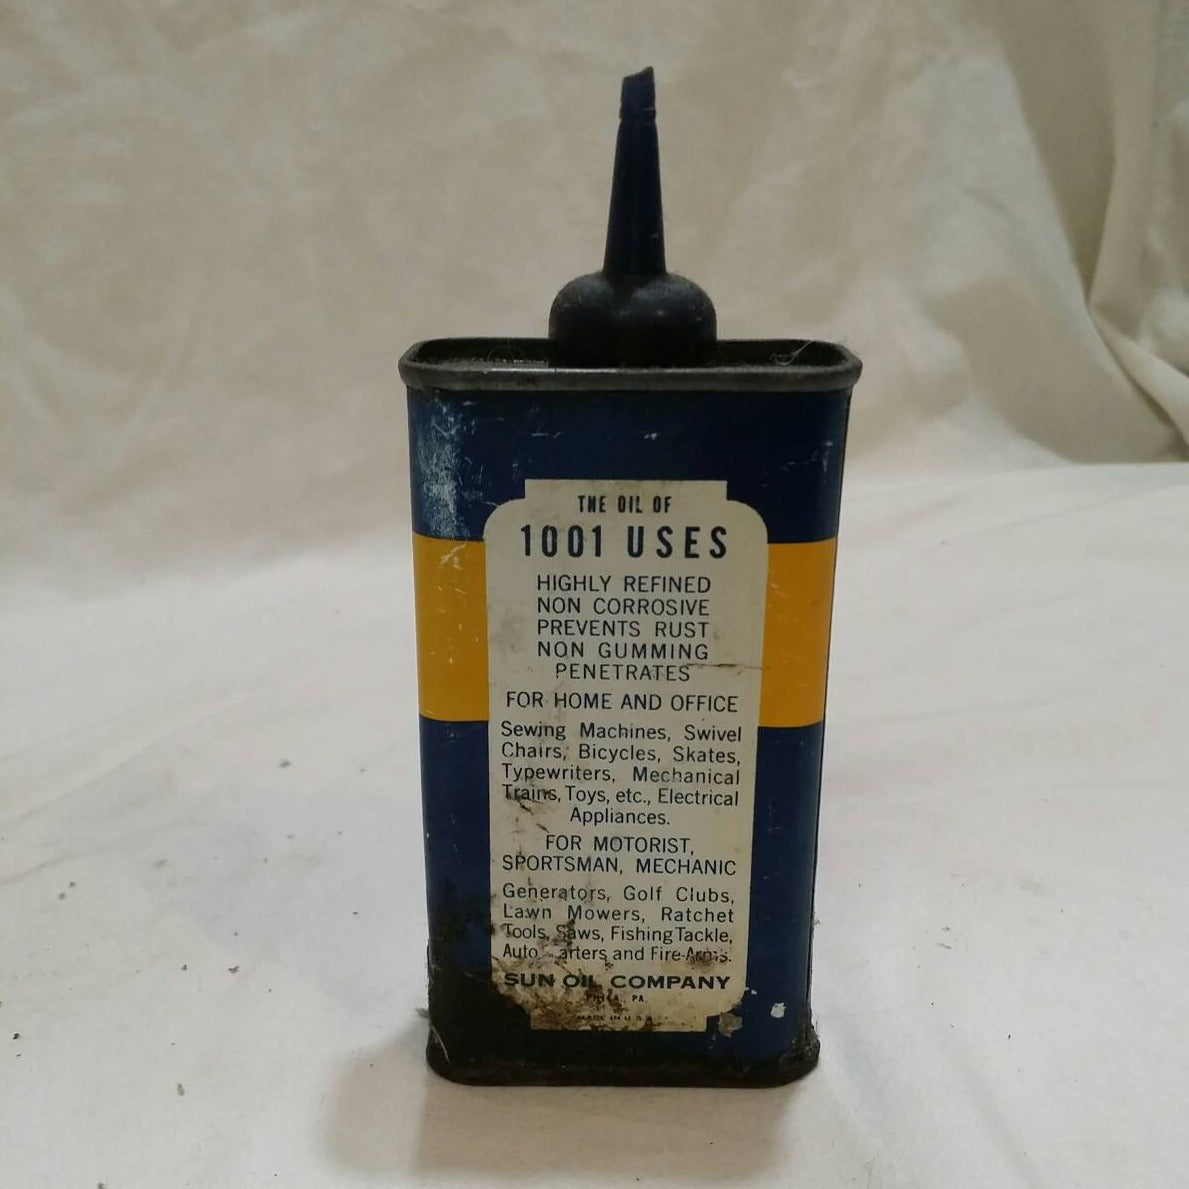 sunoco household antique oil can